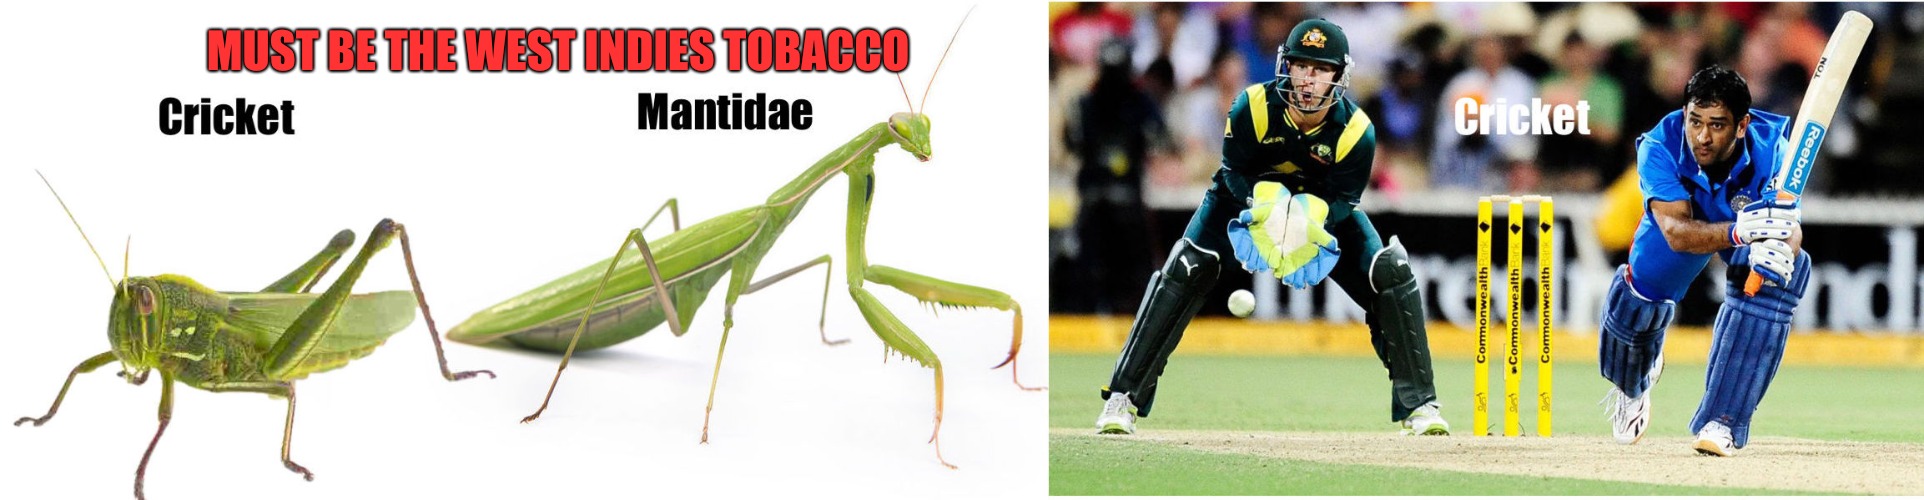 MUST BE THE WEST INDIES TOBACCO | made w/ Imgflip meme maker